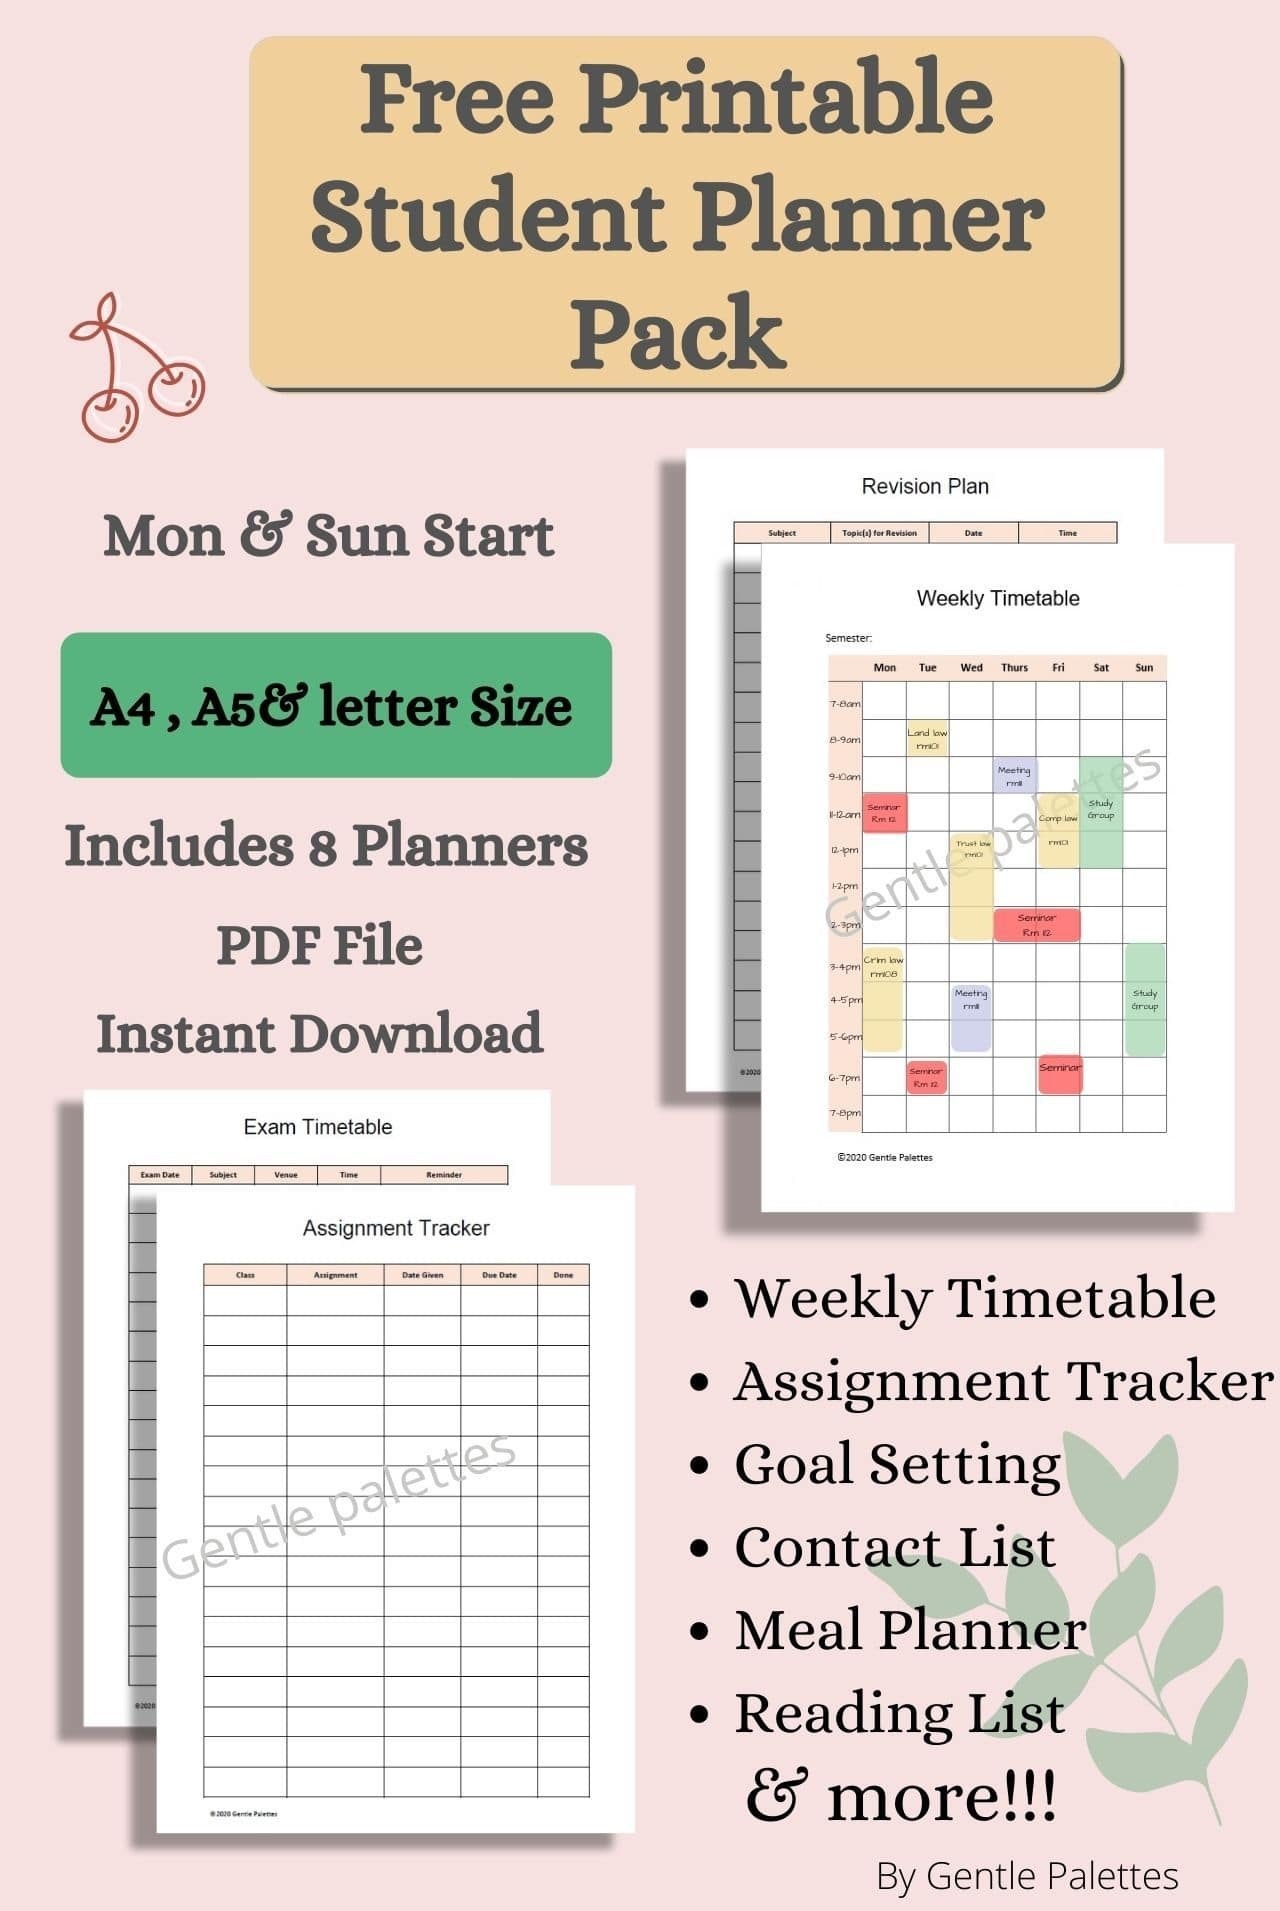 11 Free Study Plan Templates to Edit, Download, and Print